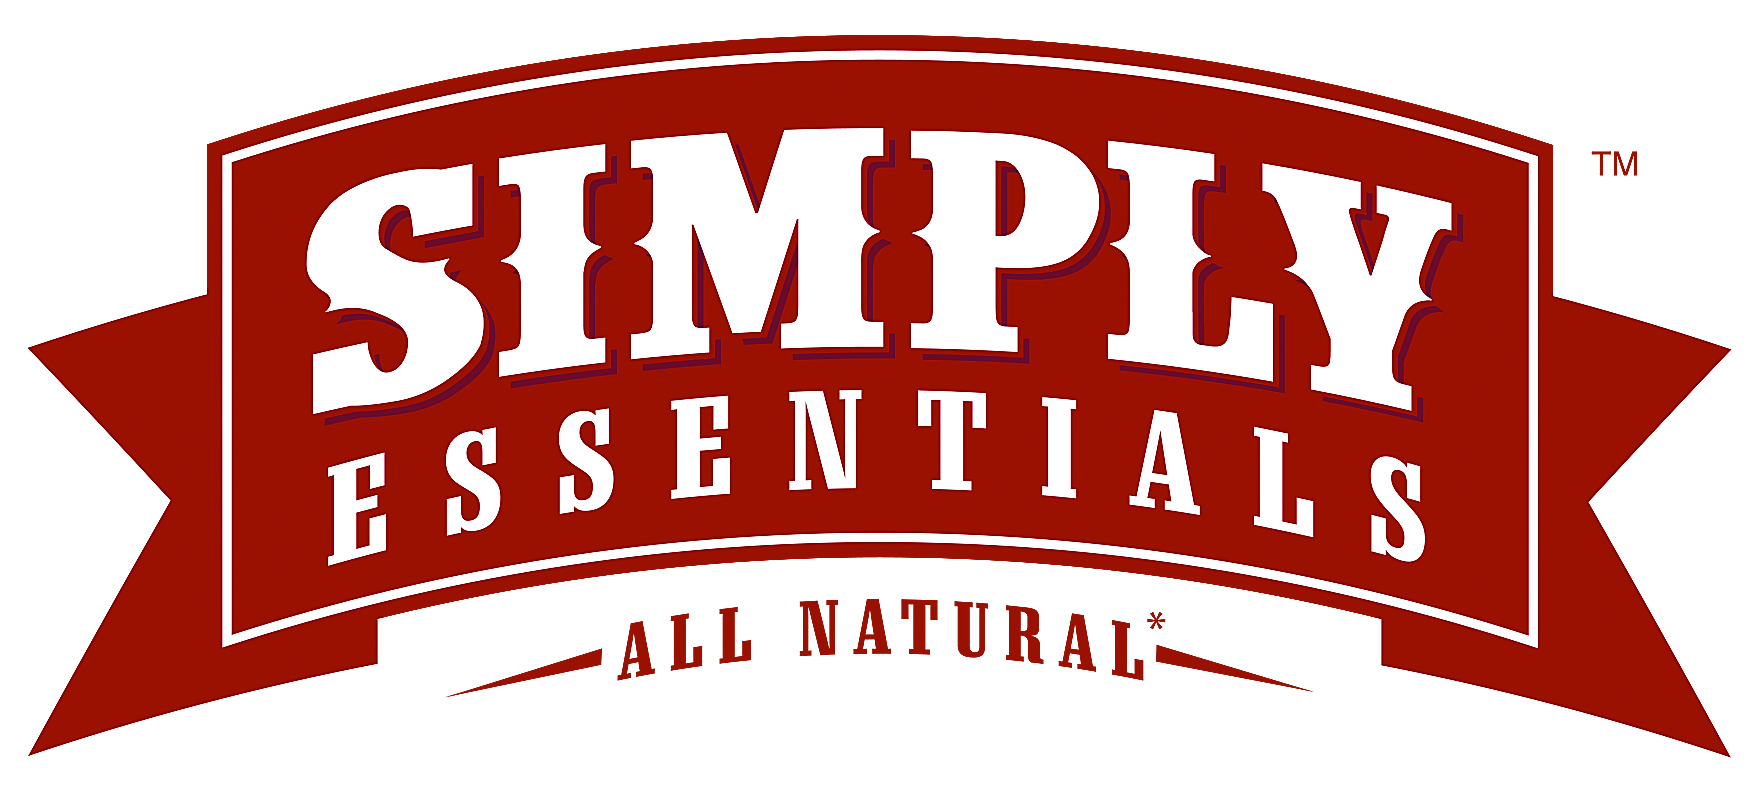 Simply Essentials sale hearing delayed until likely later this month